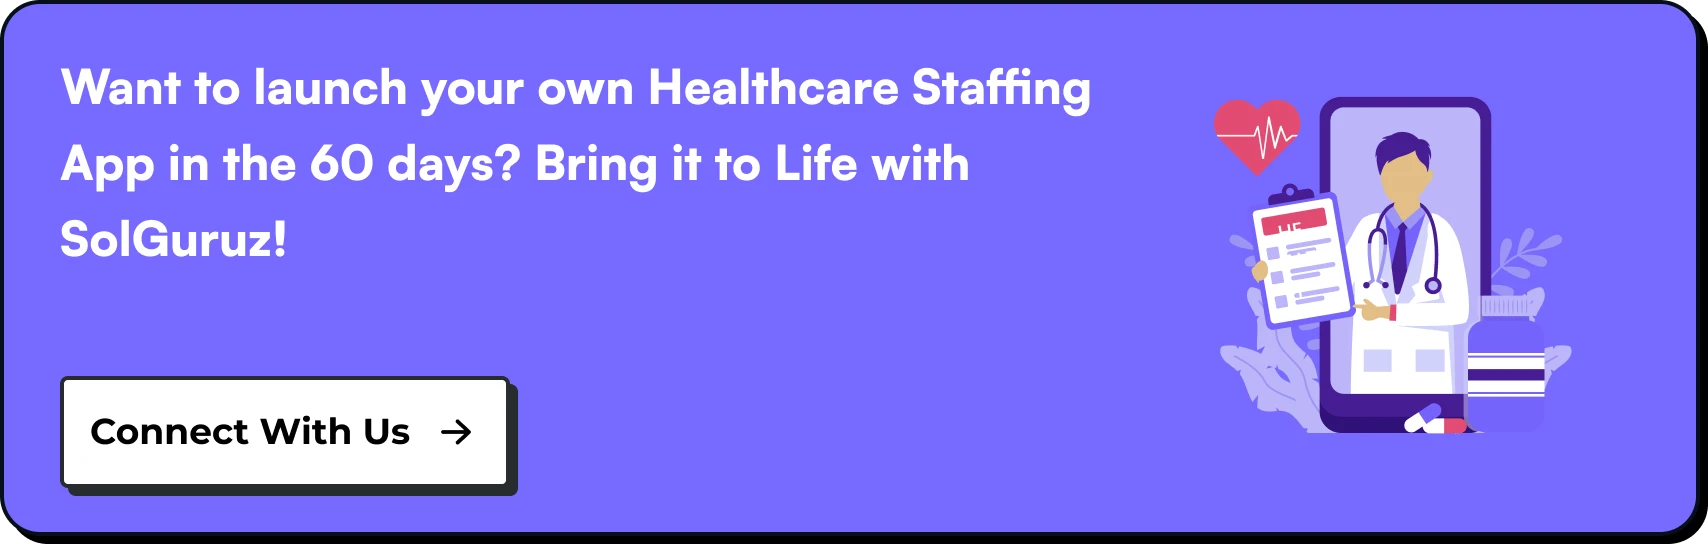 Want to launch your own Healthcare Staffing App in the 60 days